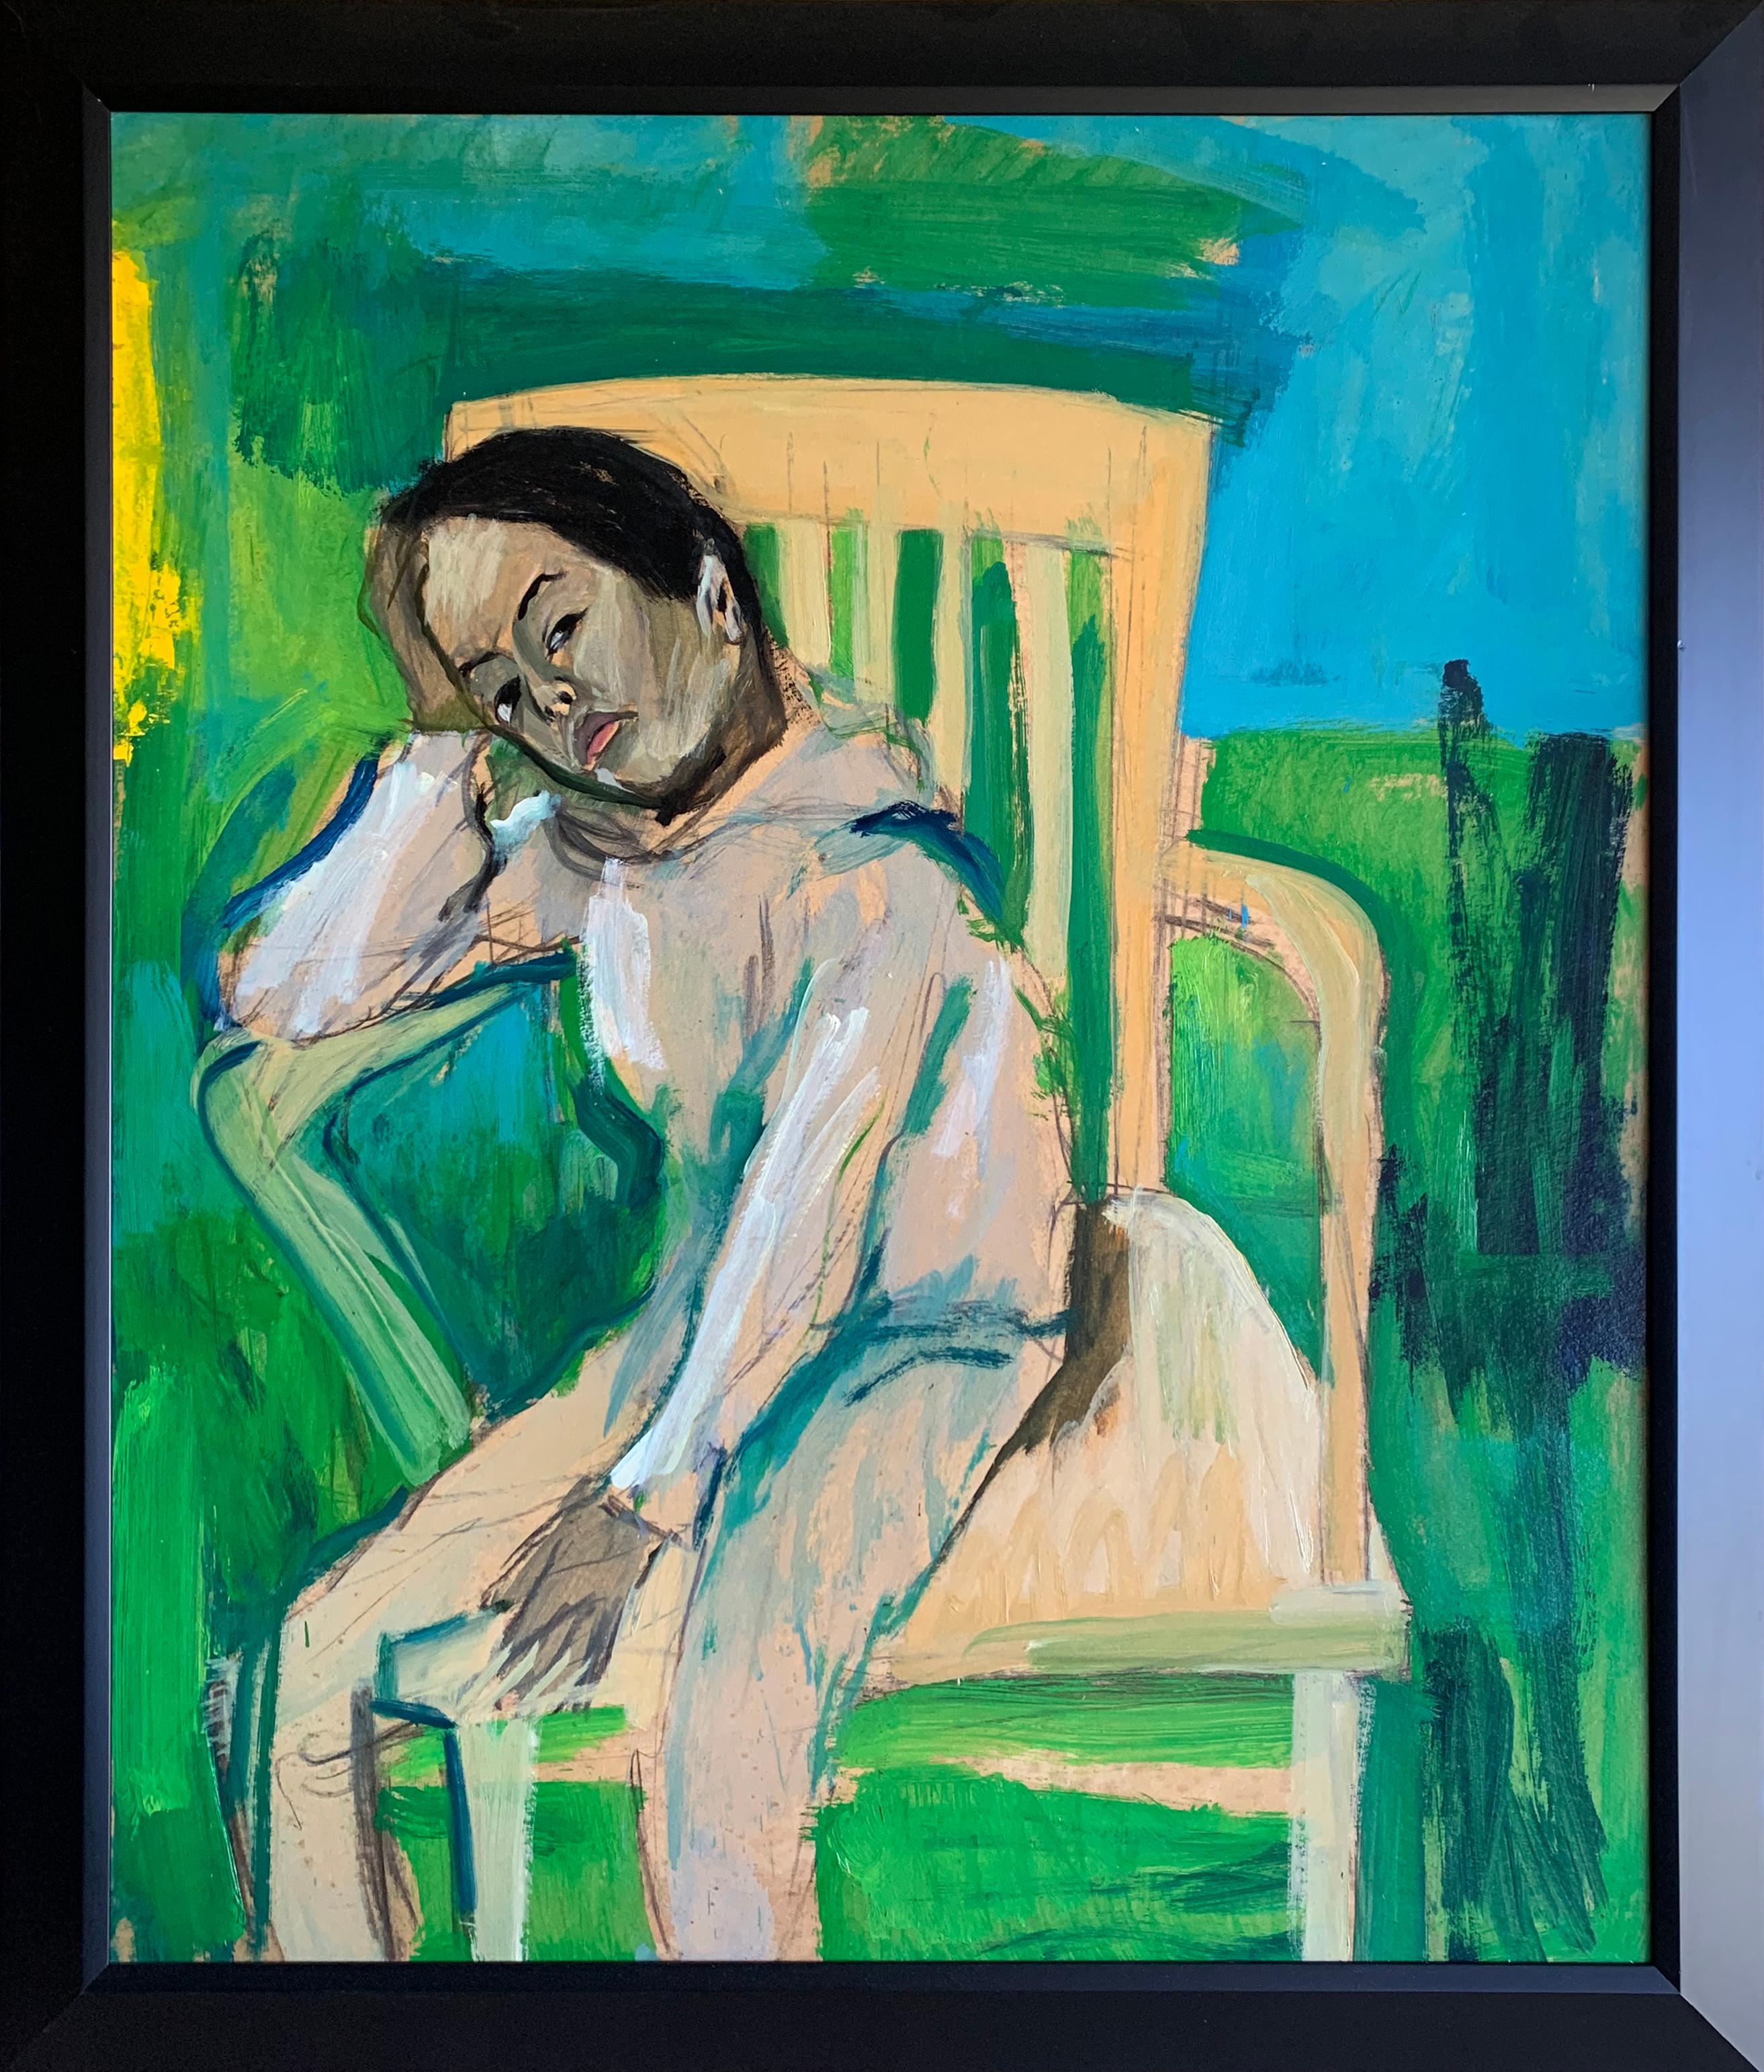 Child Resting in Chair, Expressionist Portrait by Philadelphia Artist - Painting by Bernard Harmon